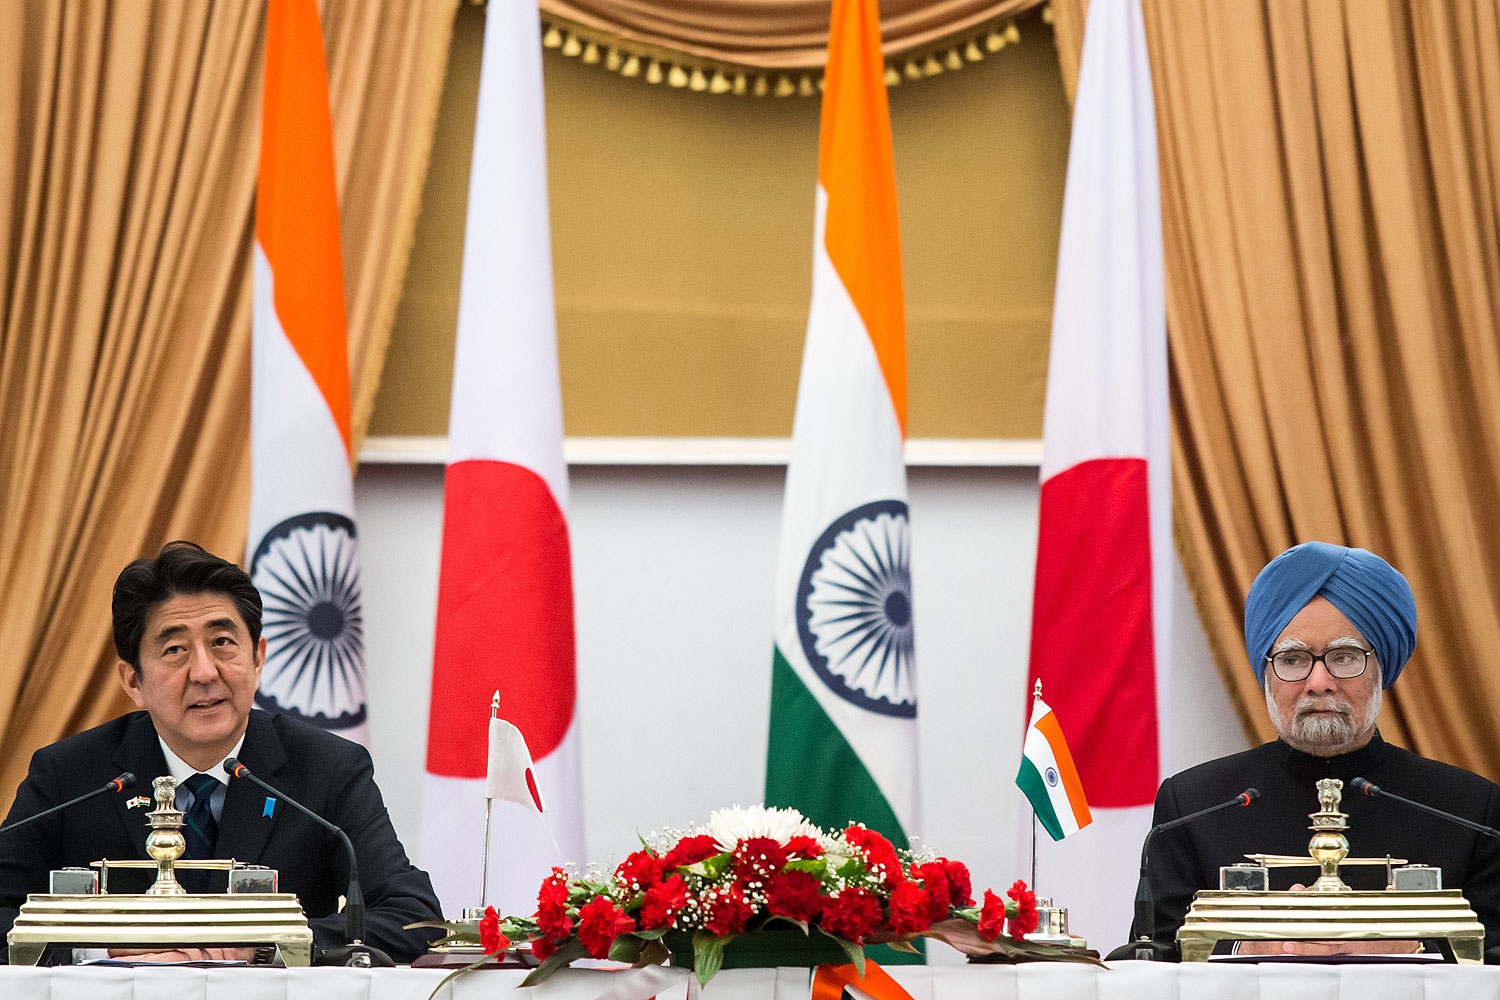 Shinzo Abe, Japans prime minister, left, and Manmohan Singh, India's prime minister, attend a news conference at Hyderabad House in New Delhi, India, on  Jan. 25, 2014 (Graham Crouch / Bloomberg / Getty Images)